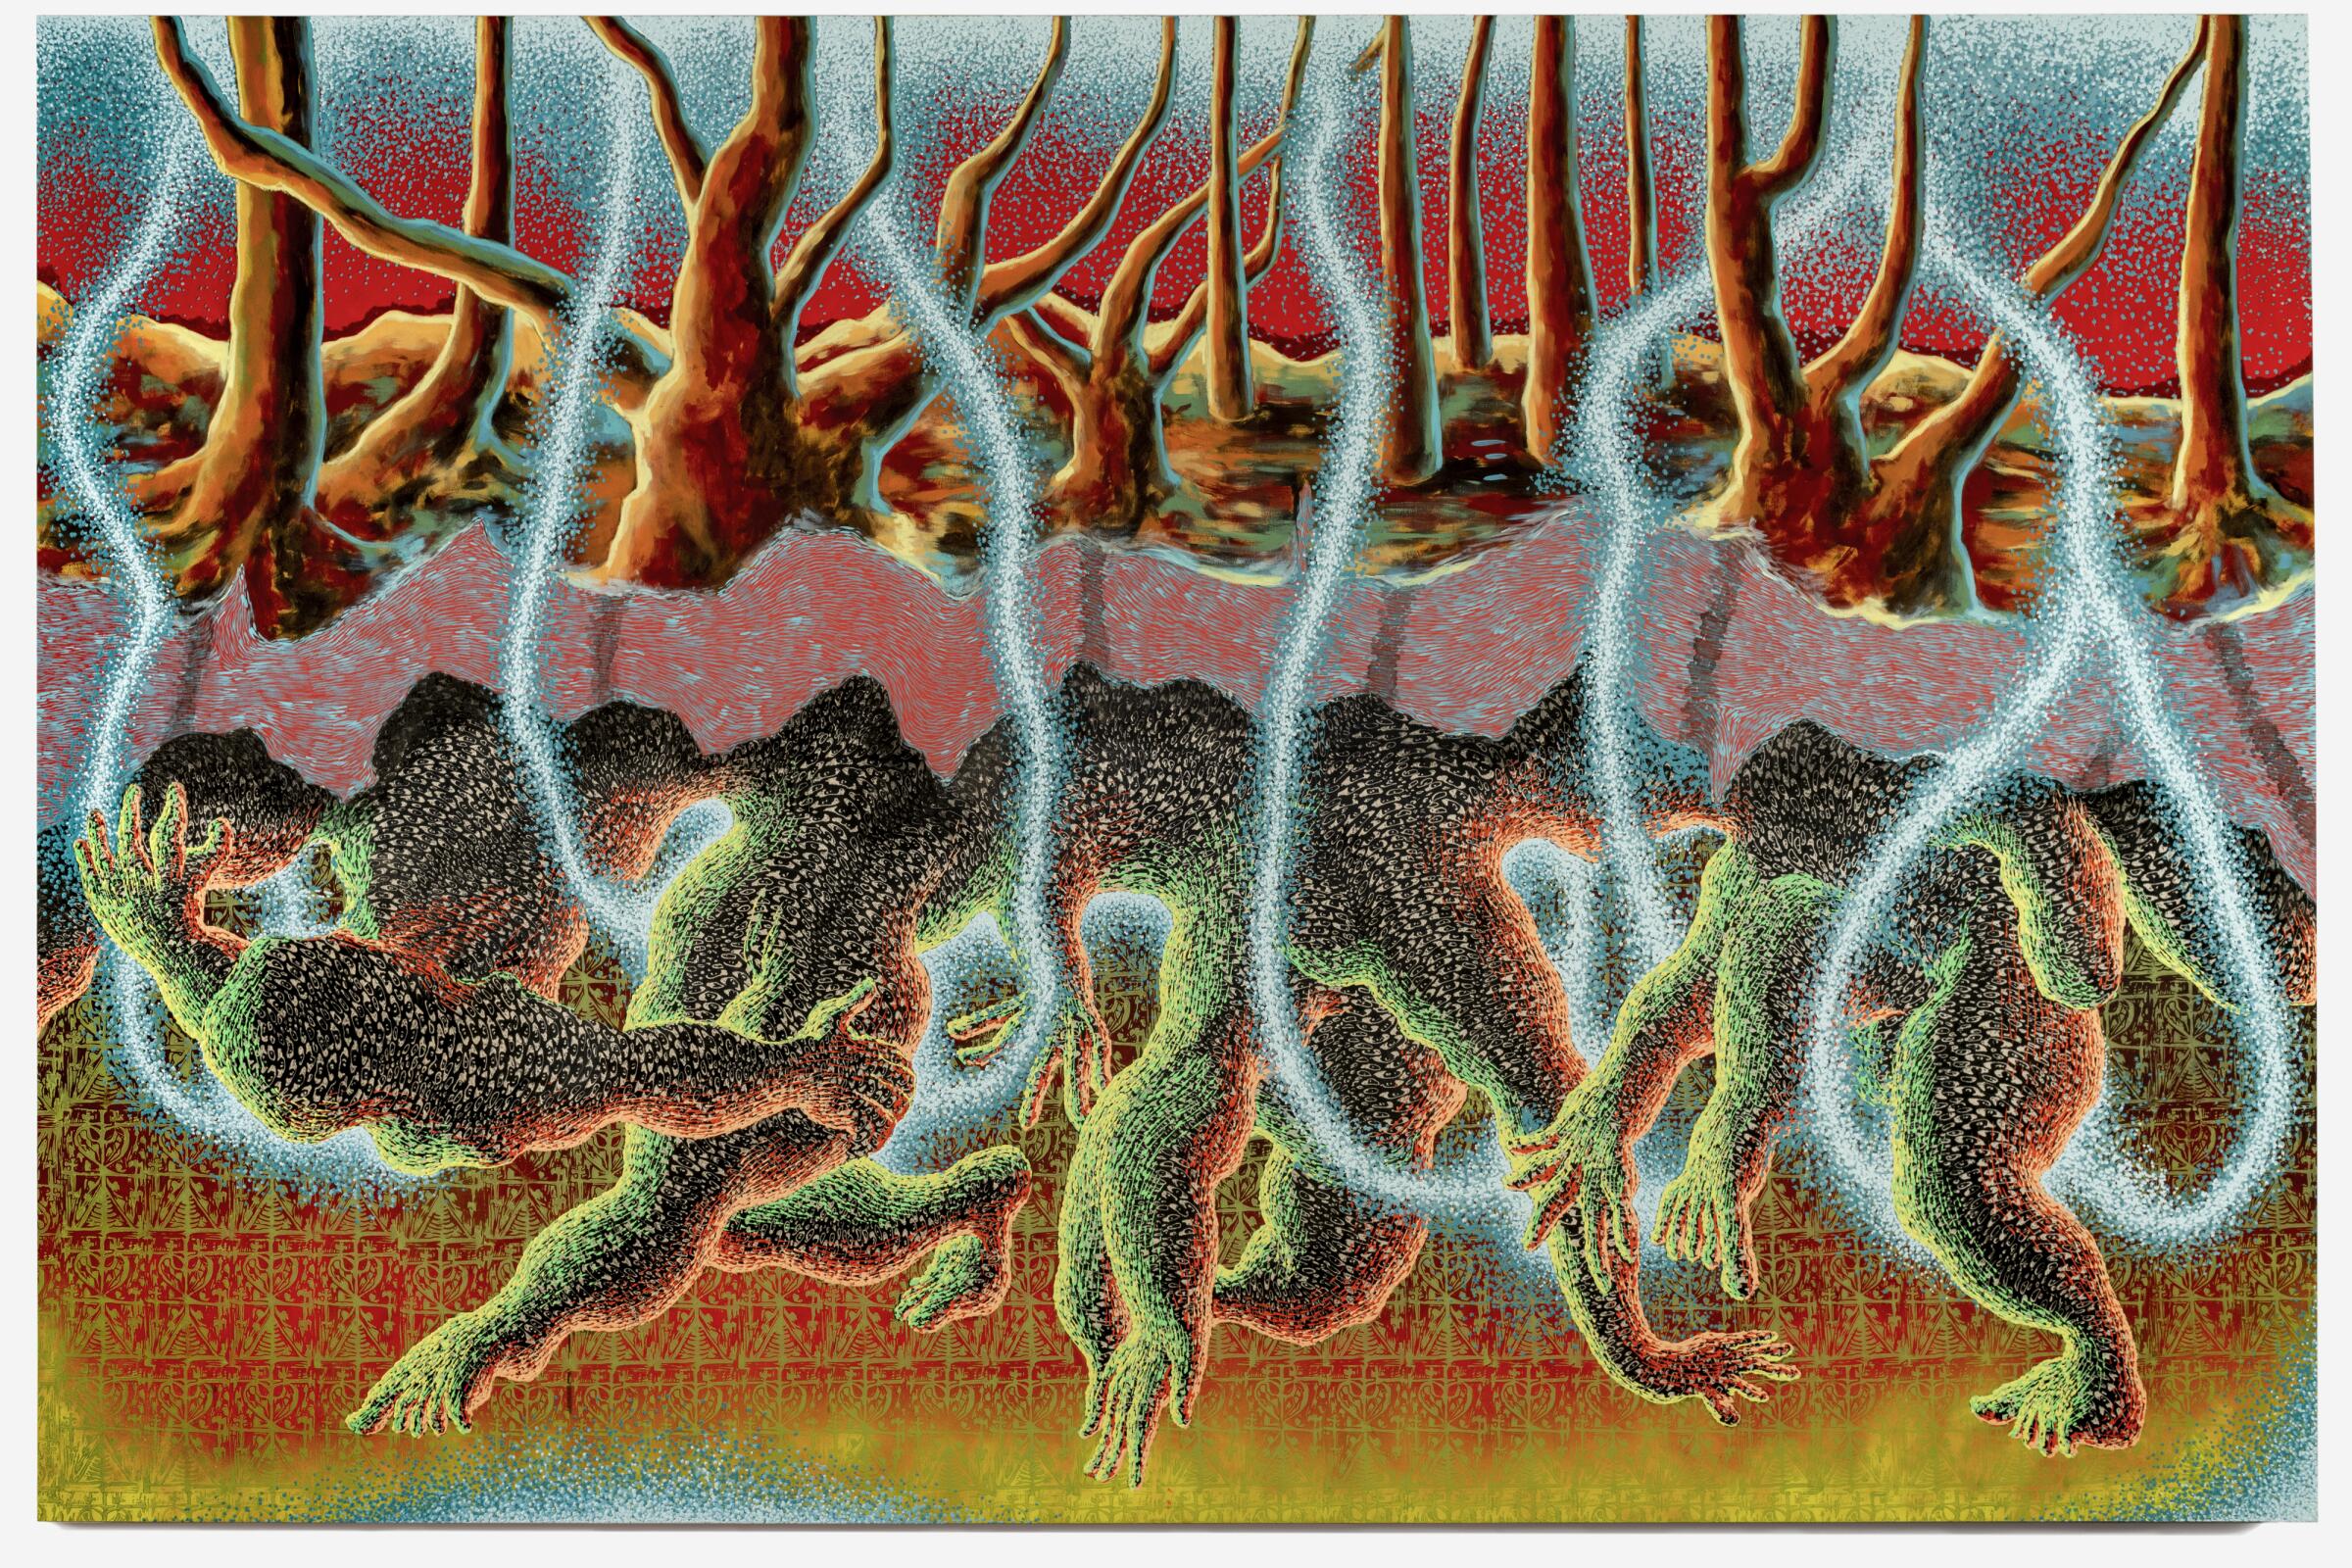 A horizontal canvas shows a cross-section of a forest. Instead of roots, the trees have tangles of arms and legs.